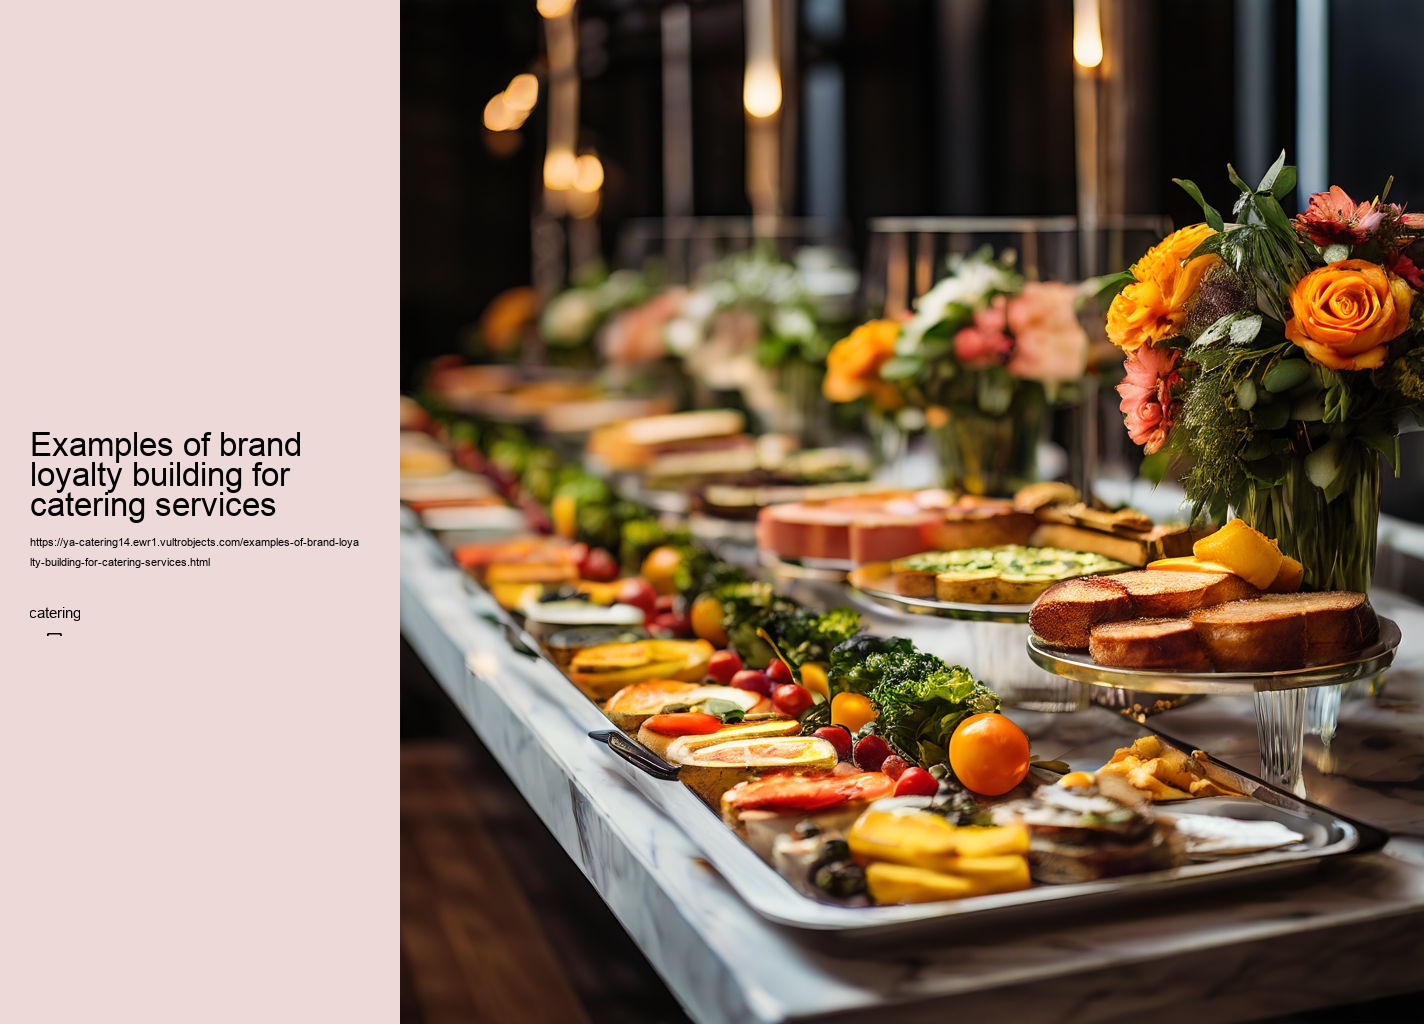 Examples of brand loyalty building for catering services